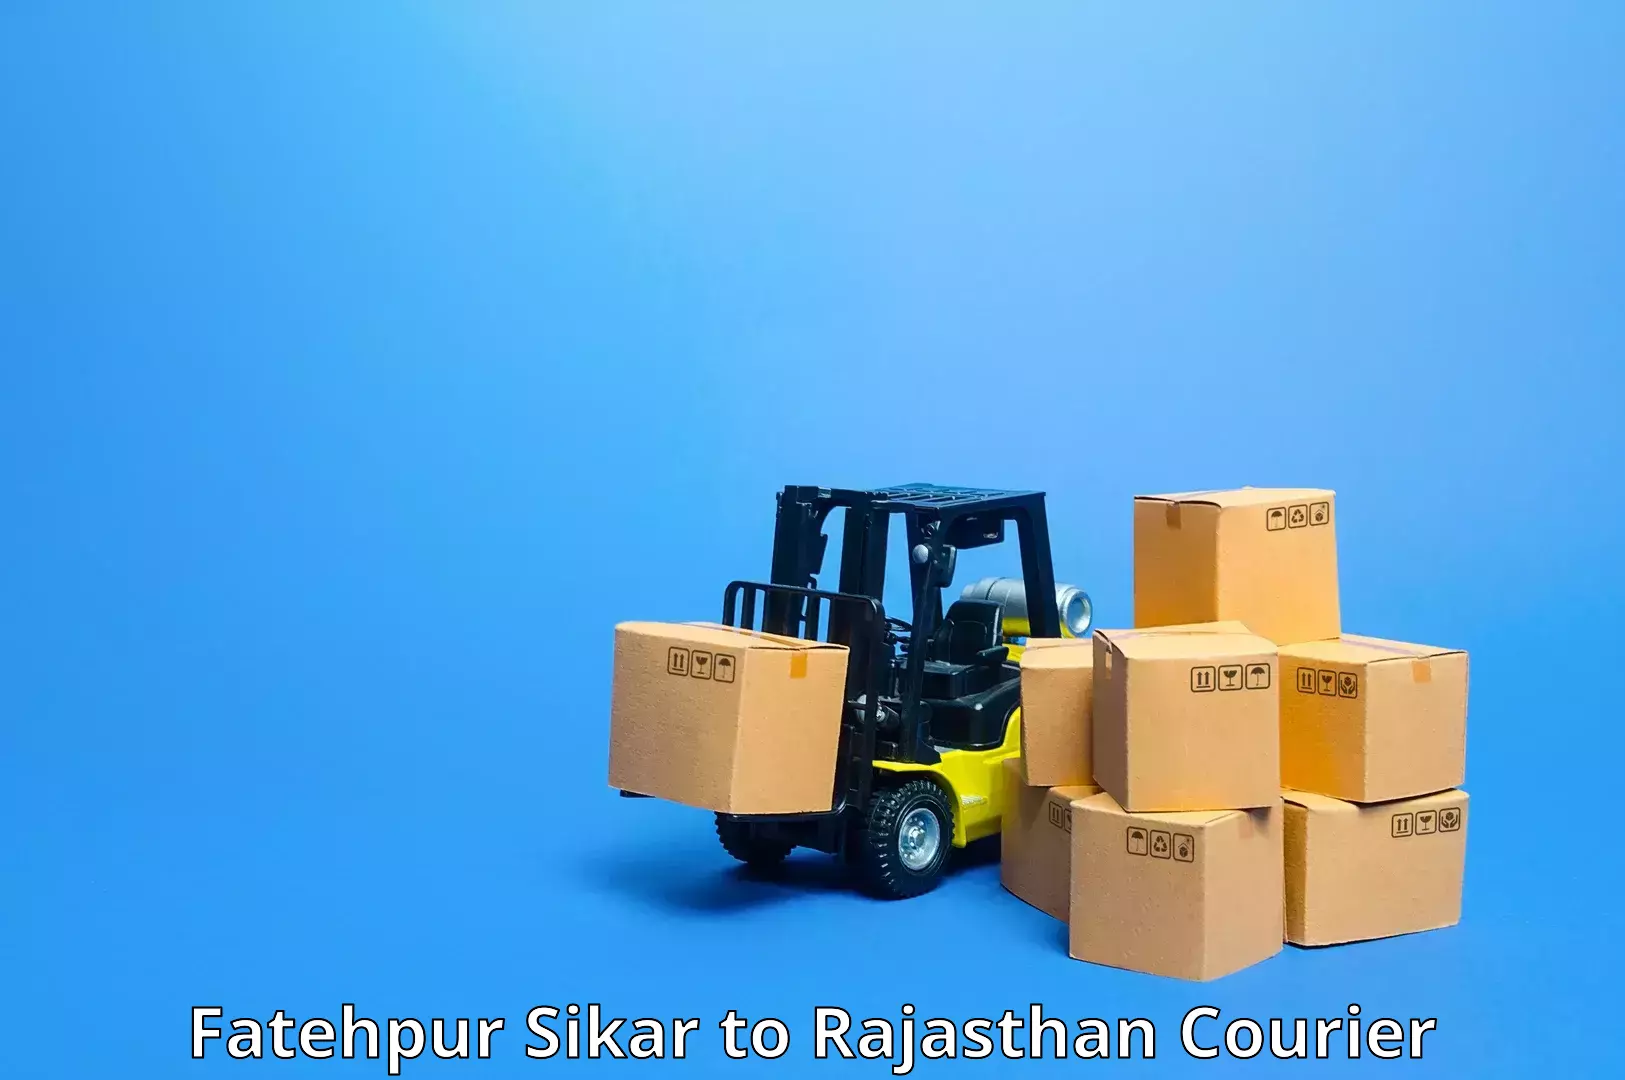 Efficient freight service Fatehpur Sikar to Mathania